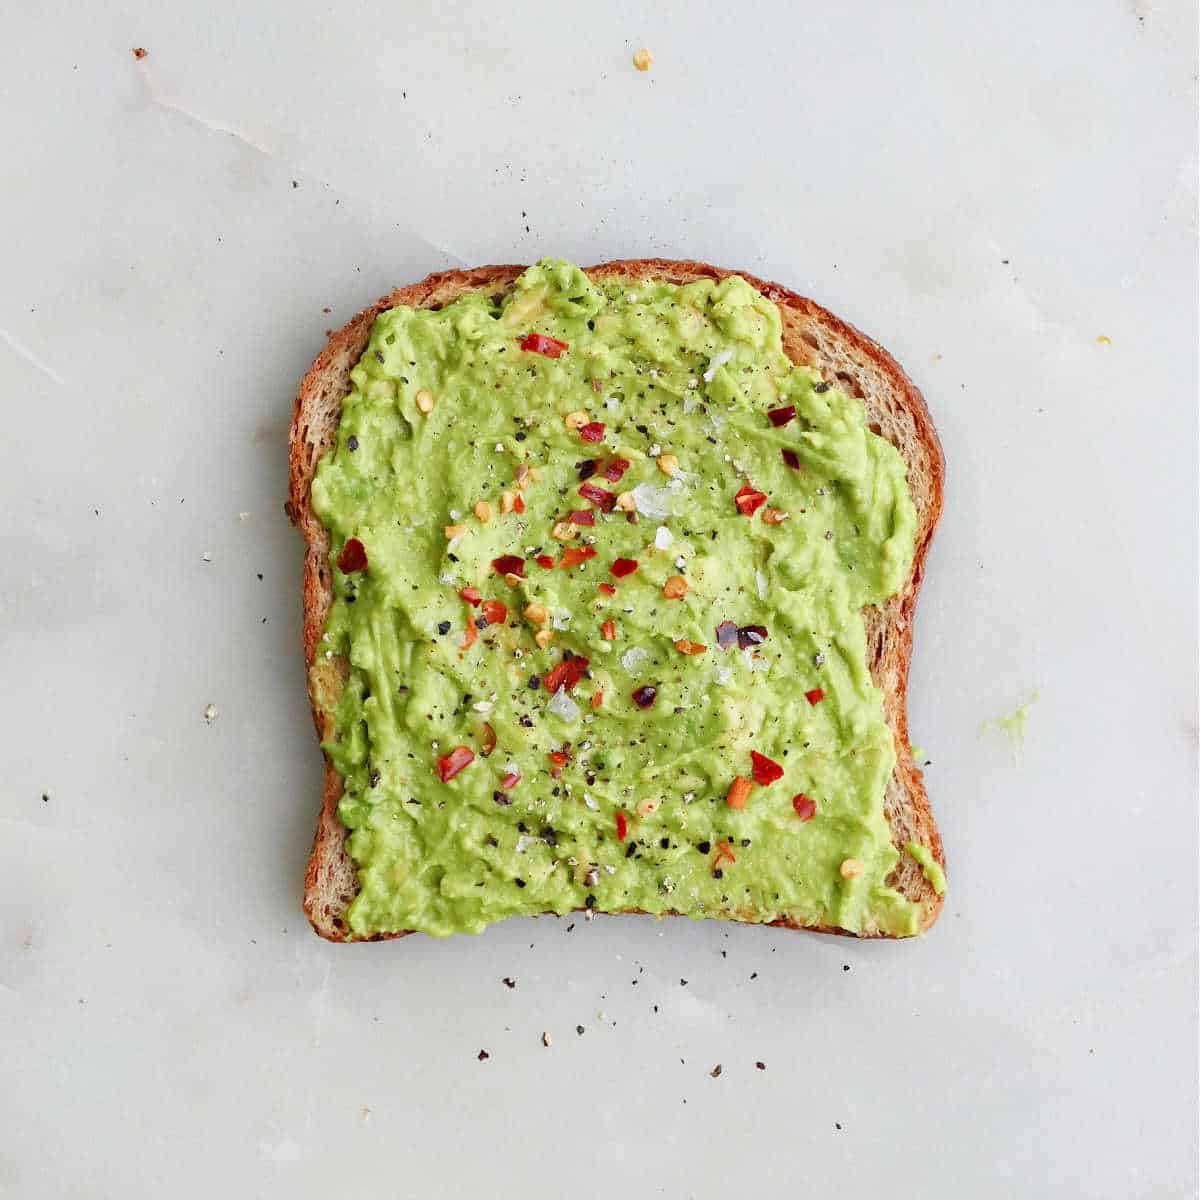 classic avocado toast topped with salt, pepper, and red pepper flakes